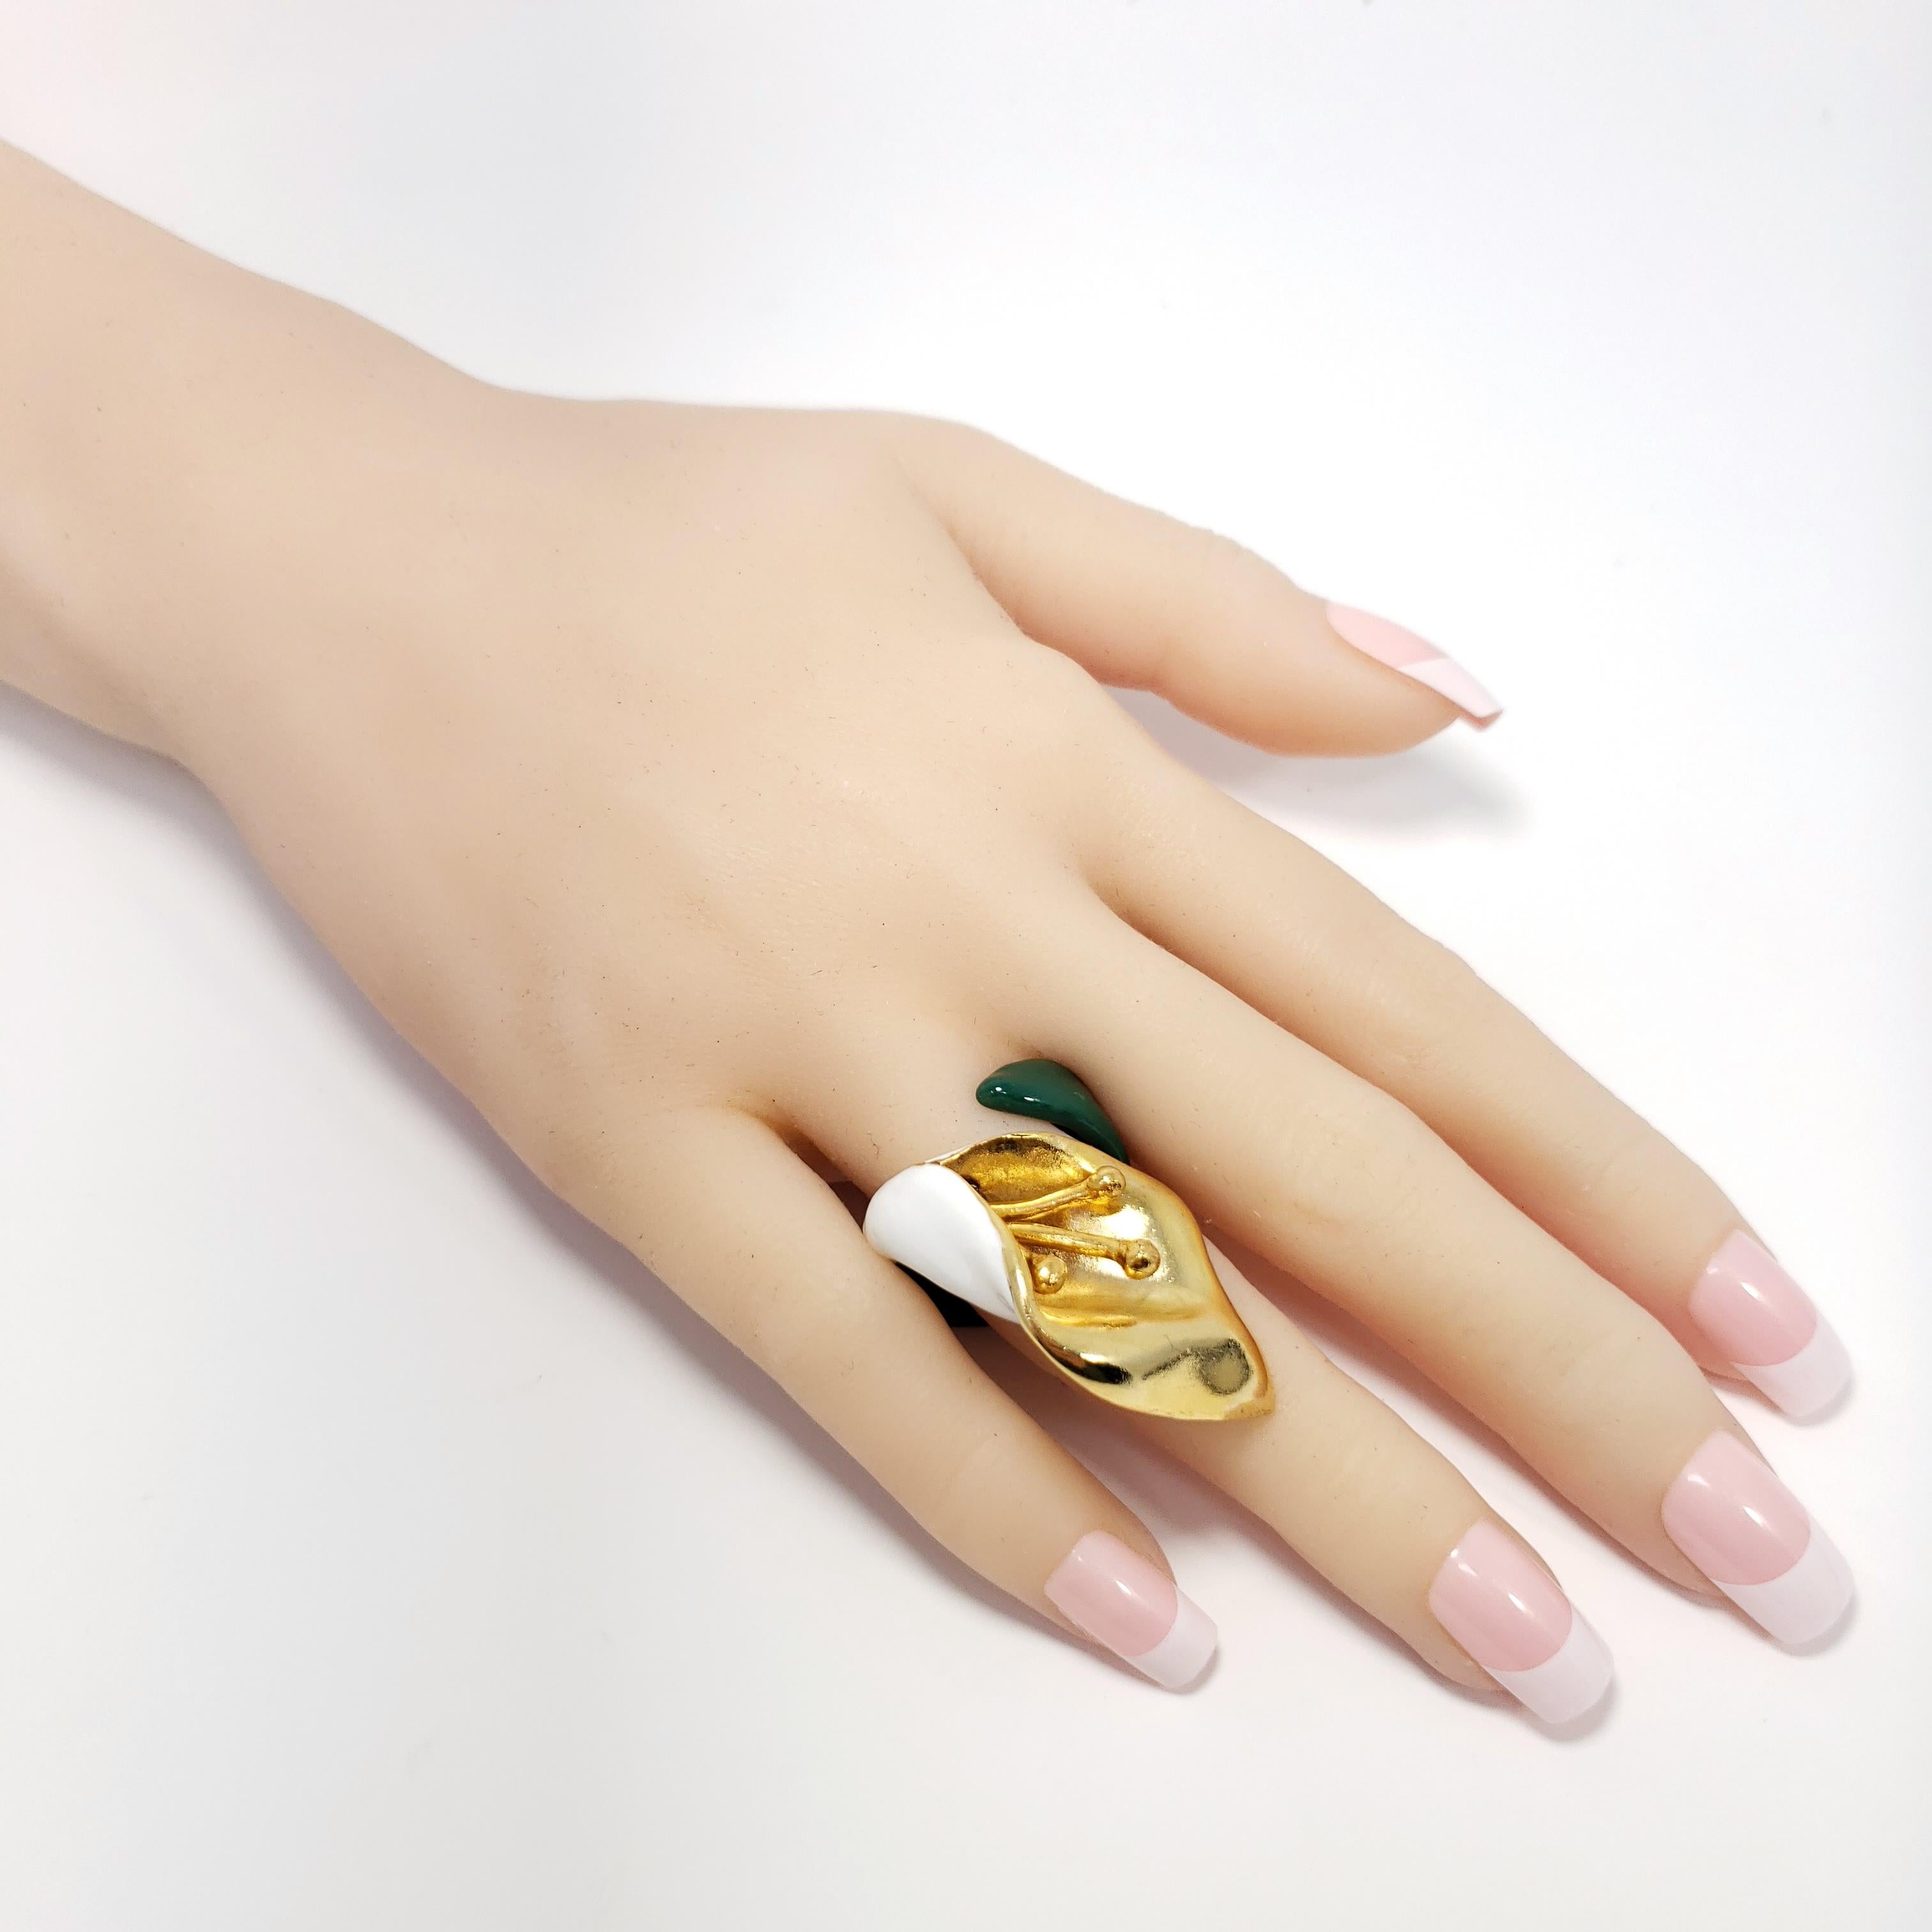 Flower chic statement ring from Oscar de la Renta. A white and green enamel calla lily in gold.

Adjustable sizes 5 to 8.5

Gold plated.

Get the matching bracelet, pin, and earrings!

Tags, Marks, Hallmarks: Oscar de la Renta, Made in USA